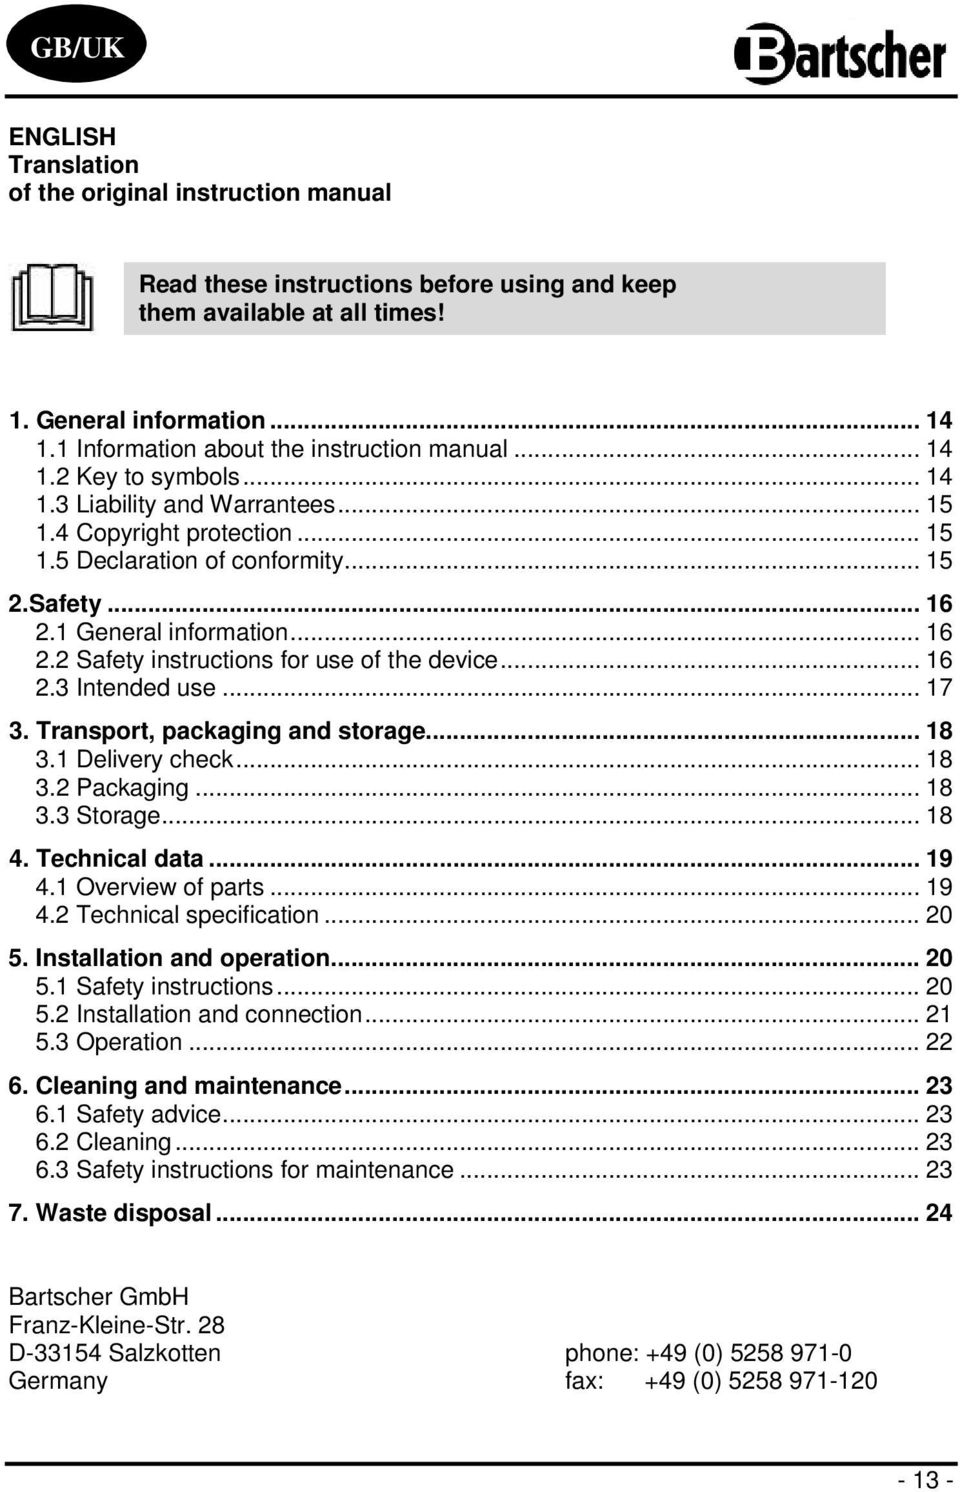 1 General information... 16 2.2 Safety instructions for use of the device... 16 2.3 Intended use... 17 3. Transport, packaging and storage... 18 3.1 Delivery check... 18 3.2 Packaging... 18 3.3 Storage.